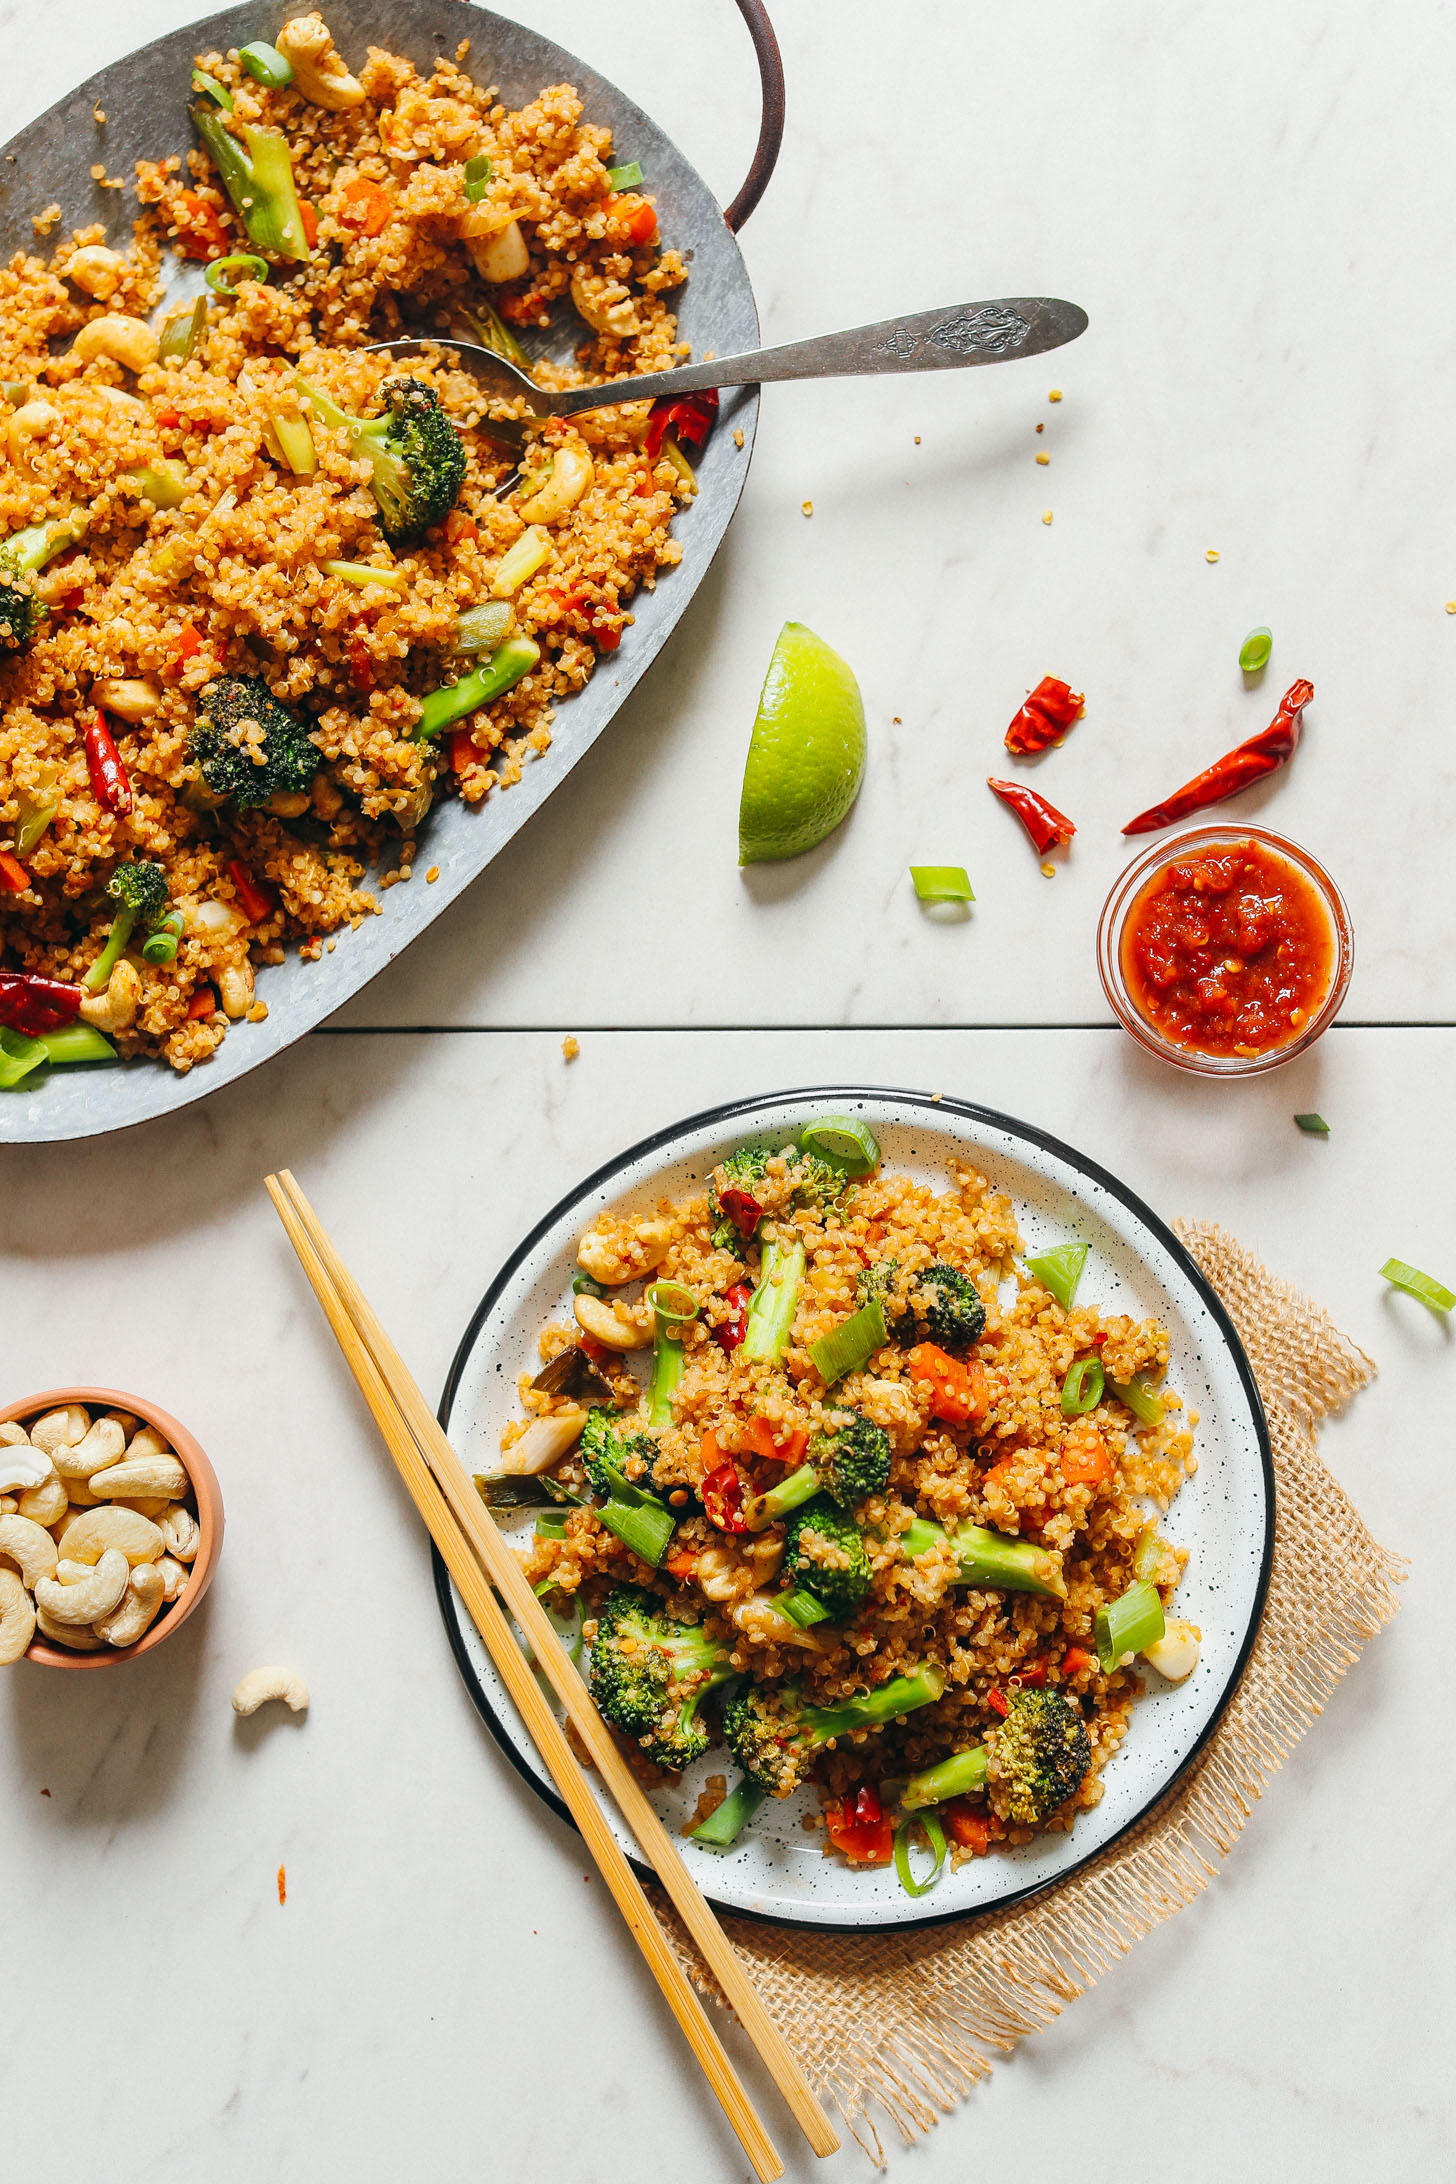 Platter and serving of vegan quinoa fried rice